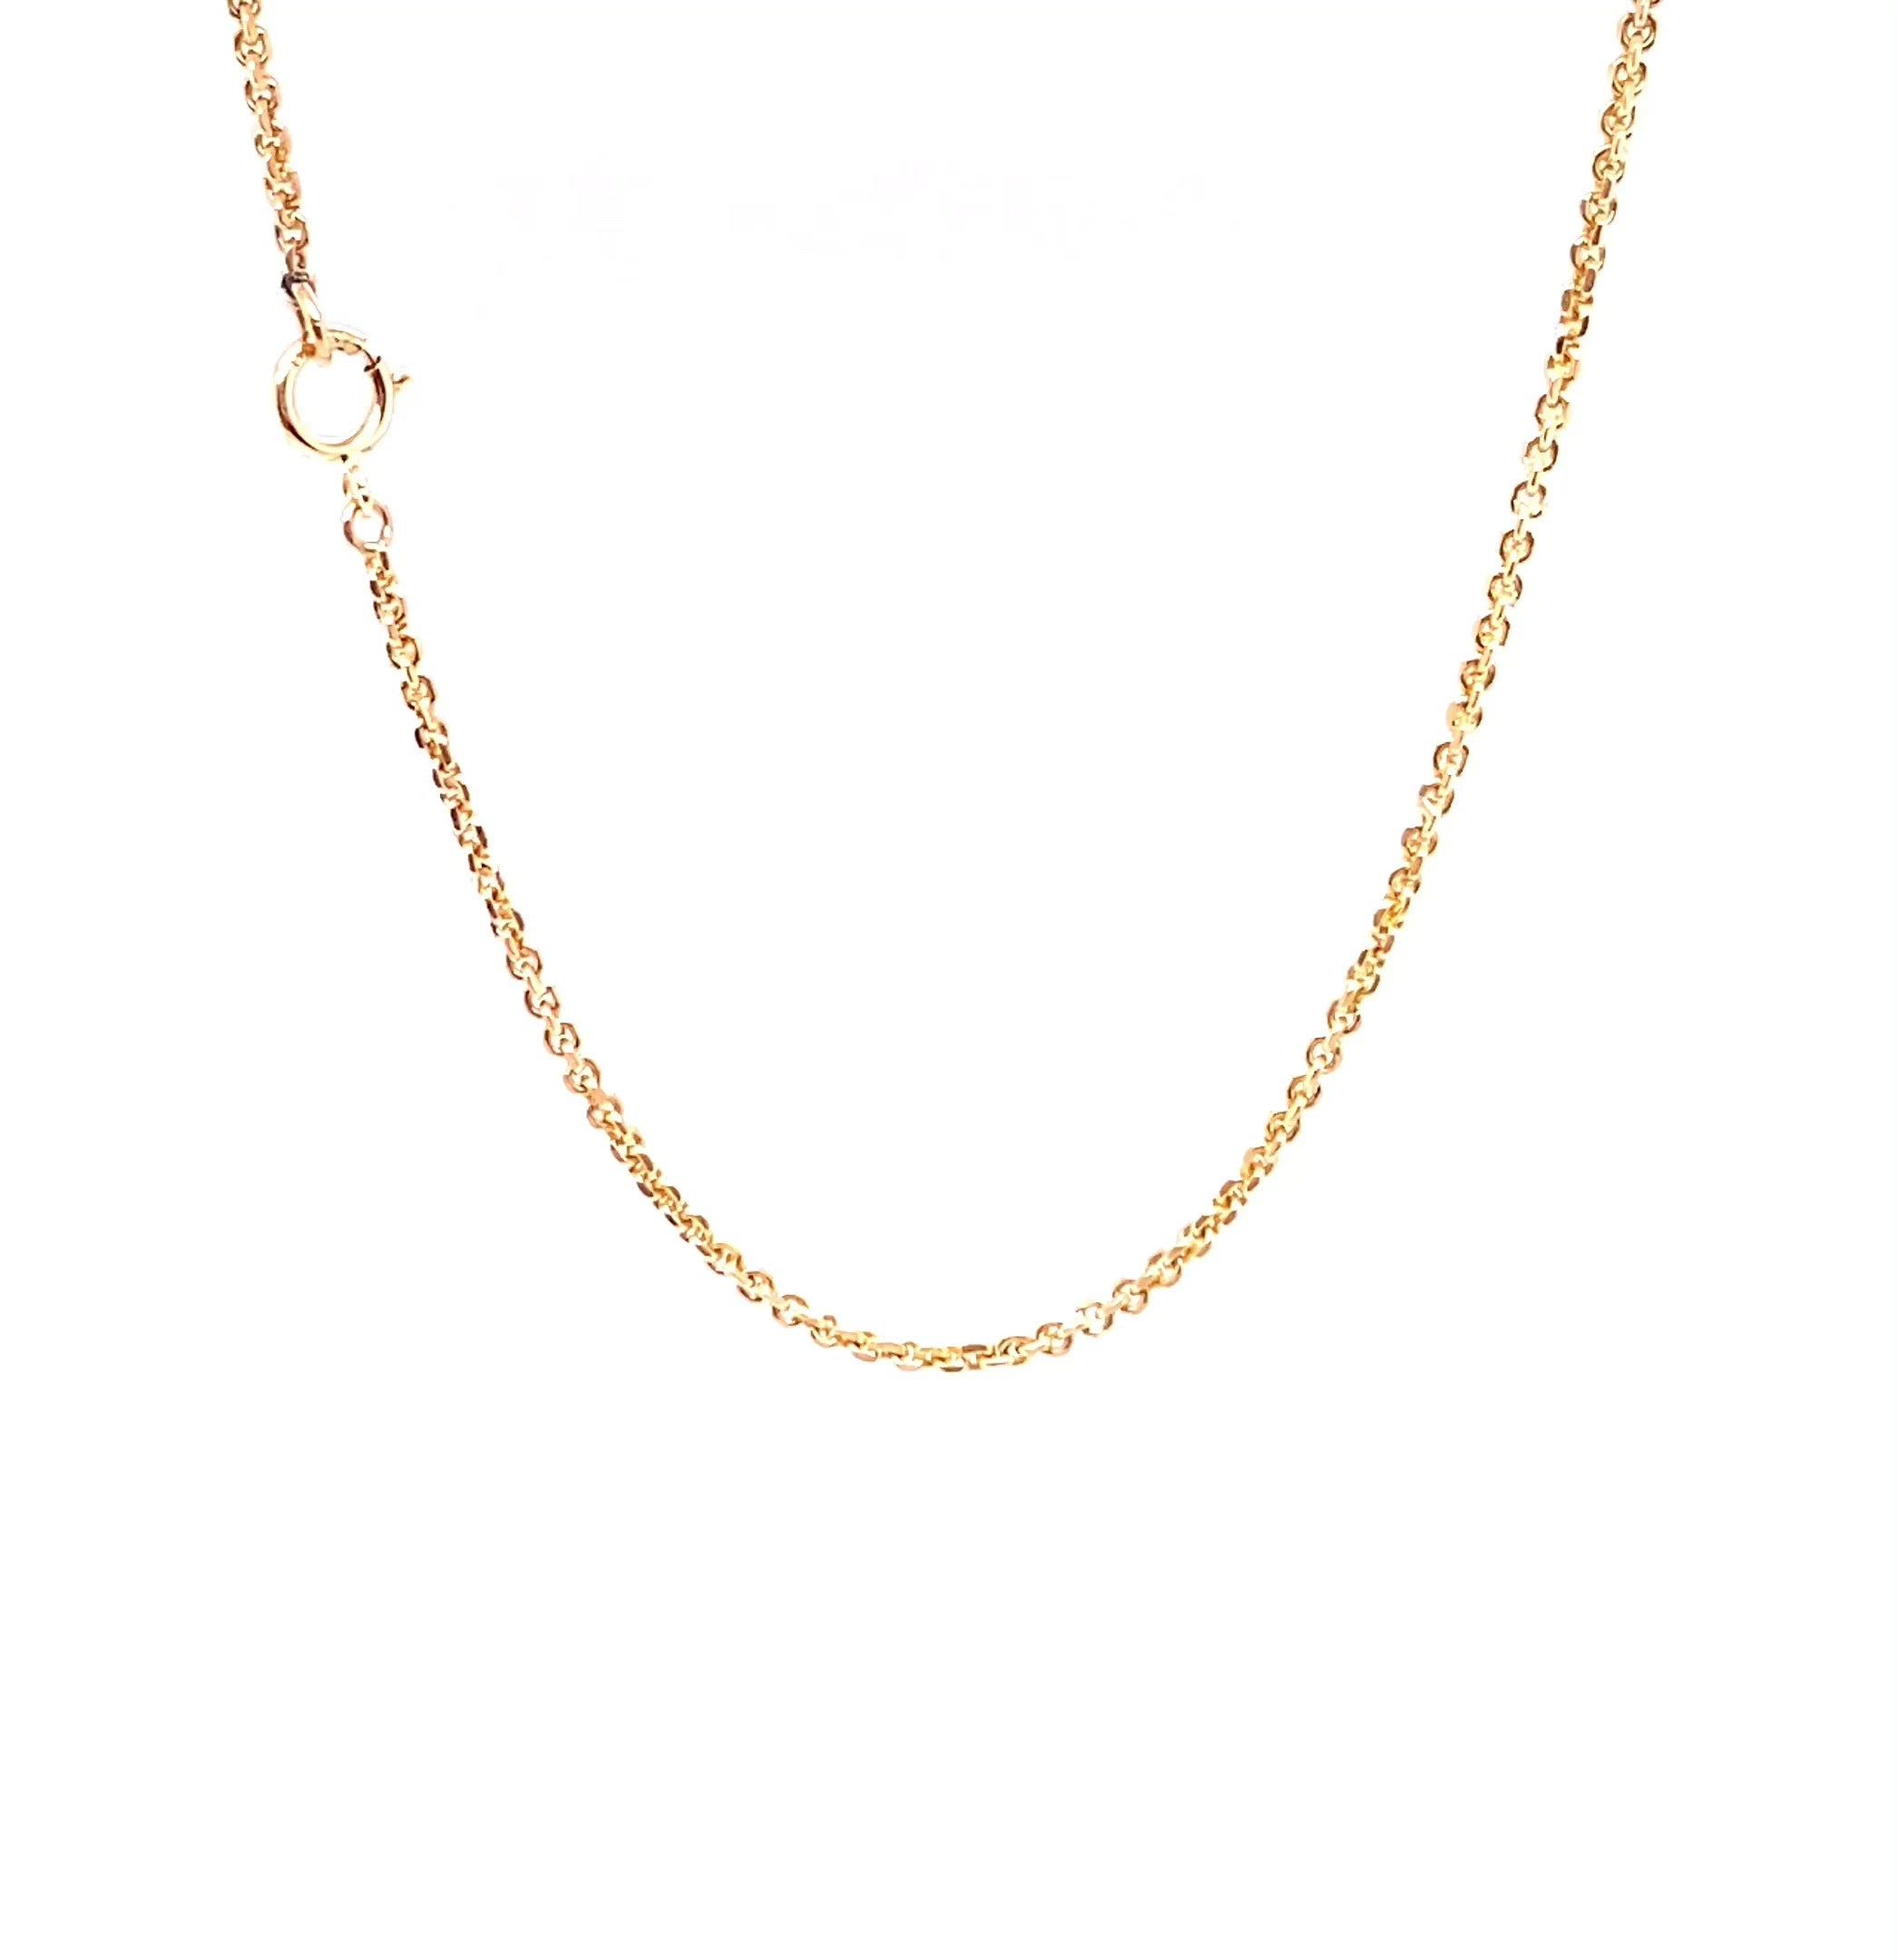 14K Solid Gold Cable Chain Necklace 24" 1.75mm 7.1 Grams Extra Long Gold Chain Gold Necklace Vintage Jewelry Estate Jewellery Fine Necklace